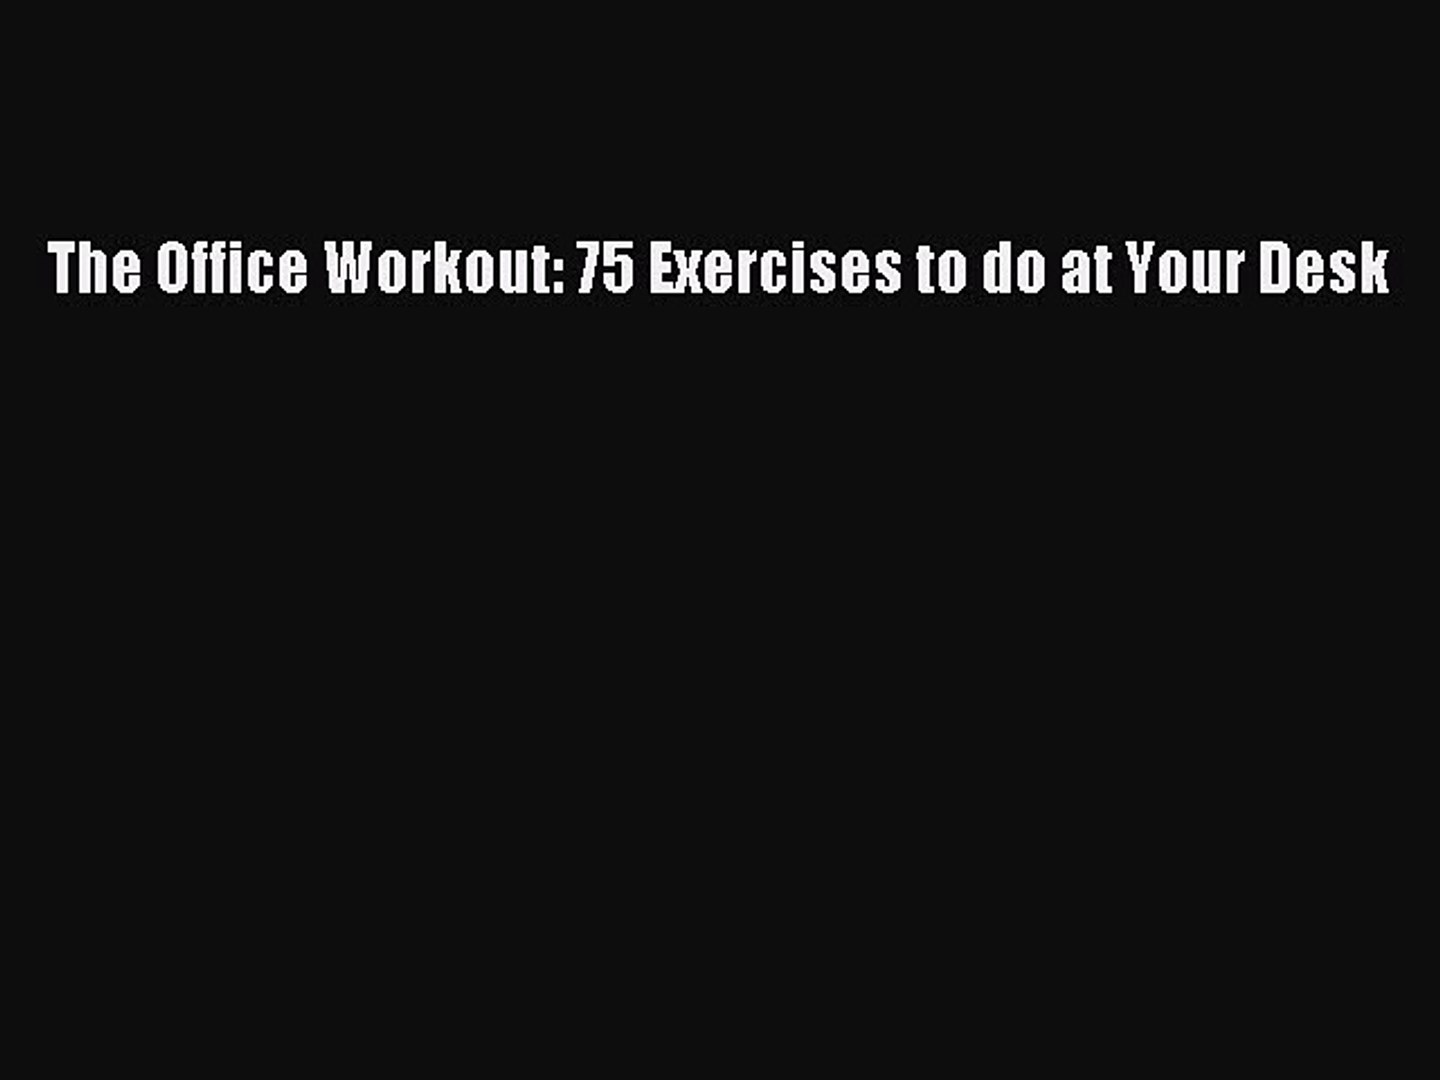 Download The Office Workout 75 Exercises To Do At Your Desk Ebook